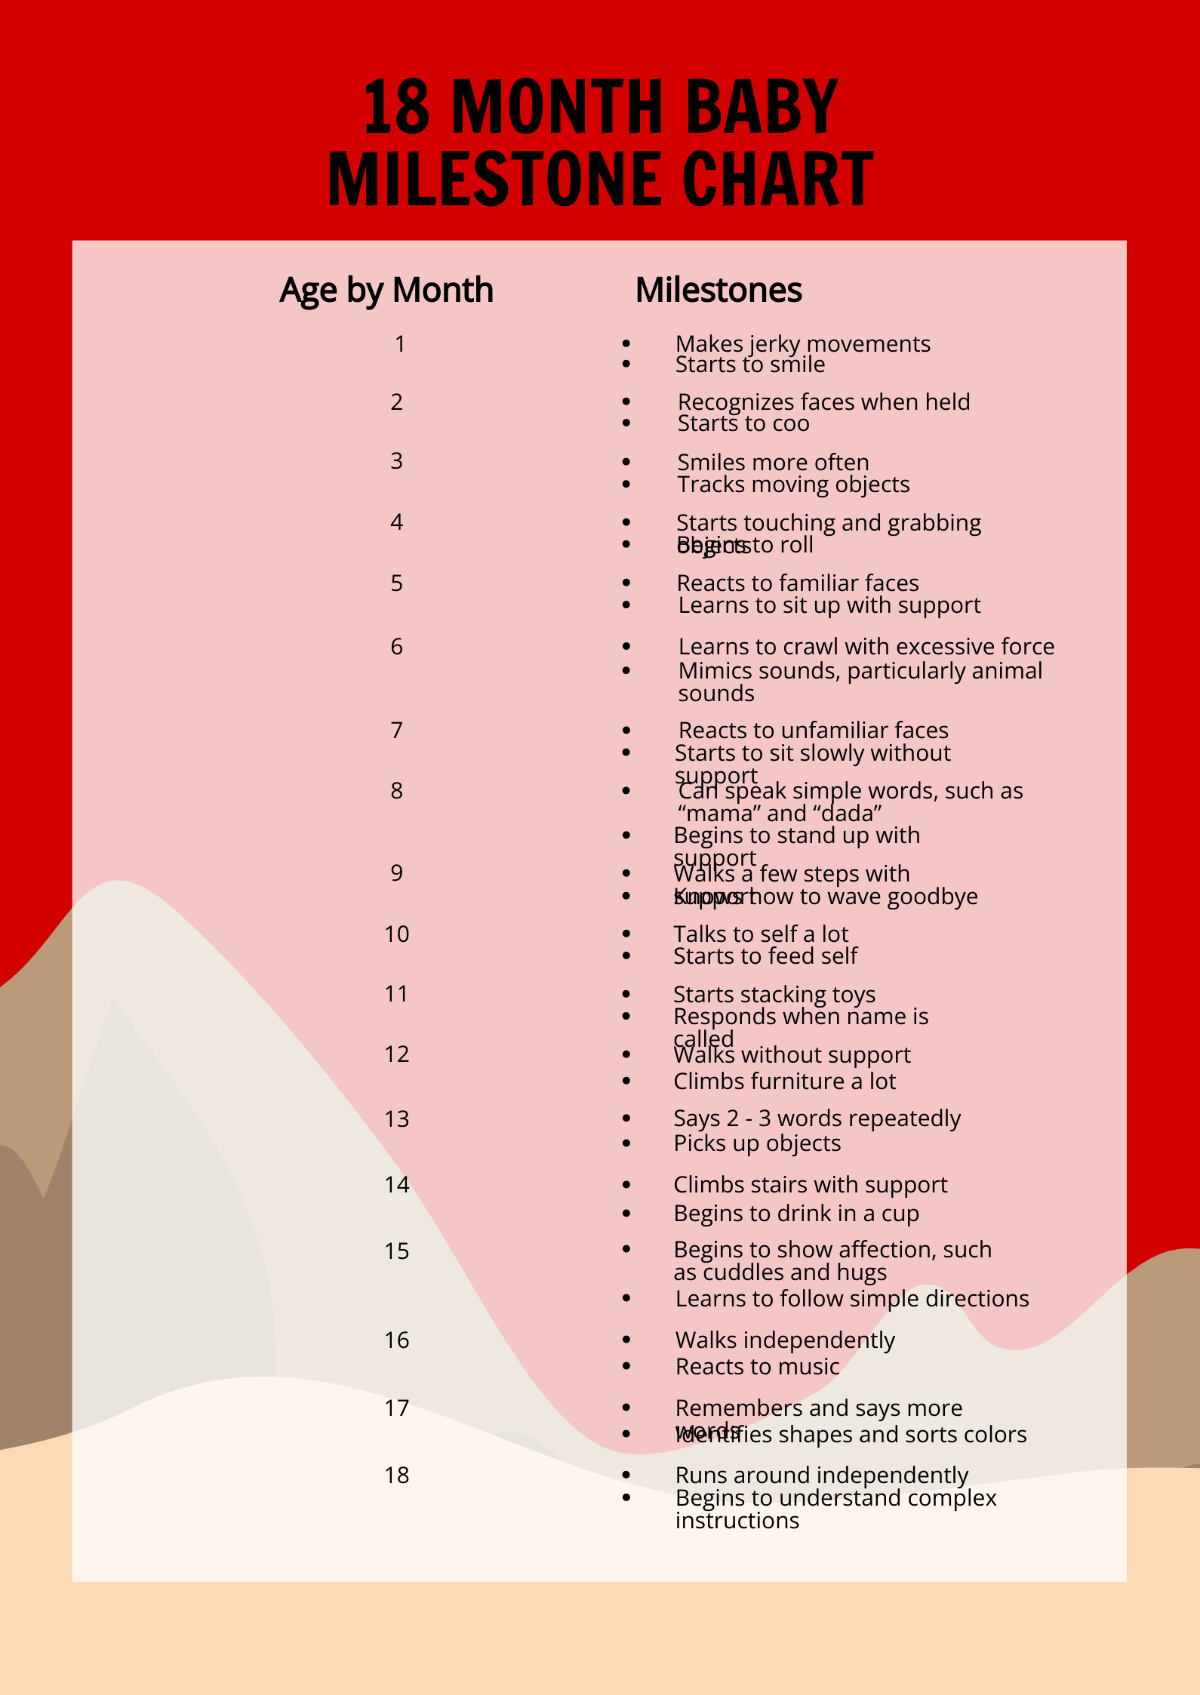 18 Month Baby Milestone Chart Template - Edit Online & Download Example ...